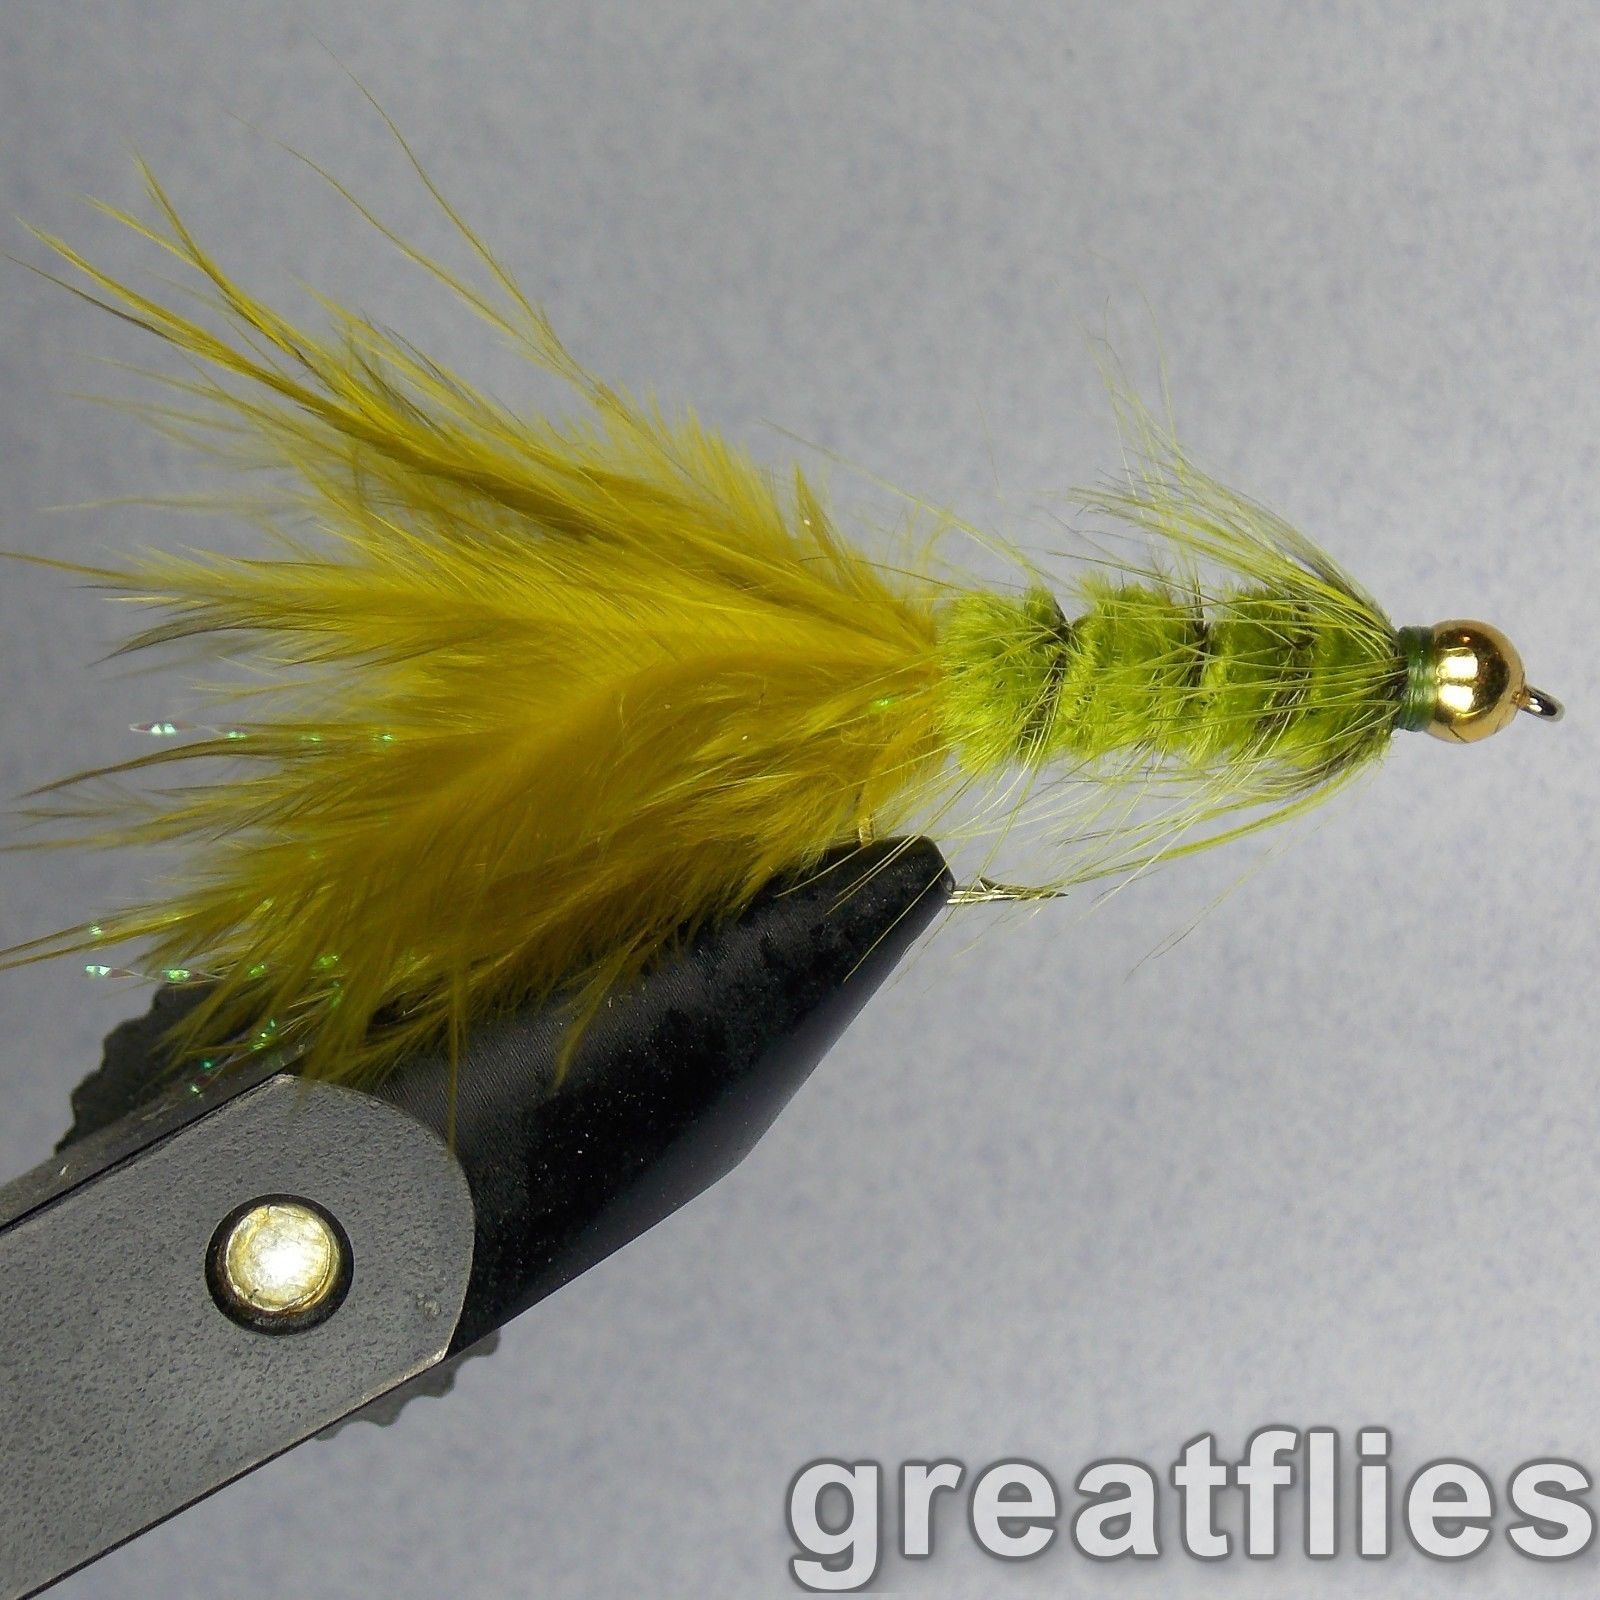 12QTY BEAD HEAD  BABY BUGGER OLIVE Fishing Flies size 12 14 & 16 